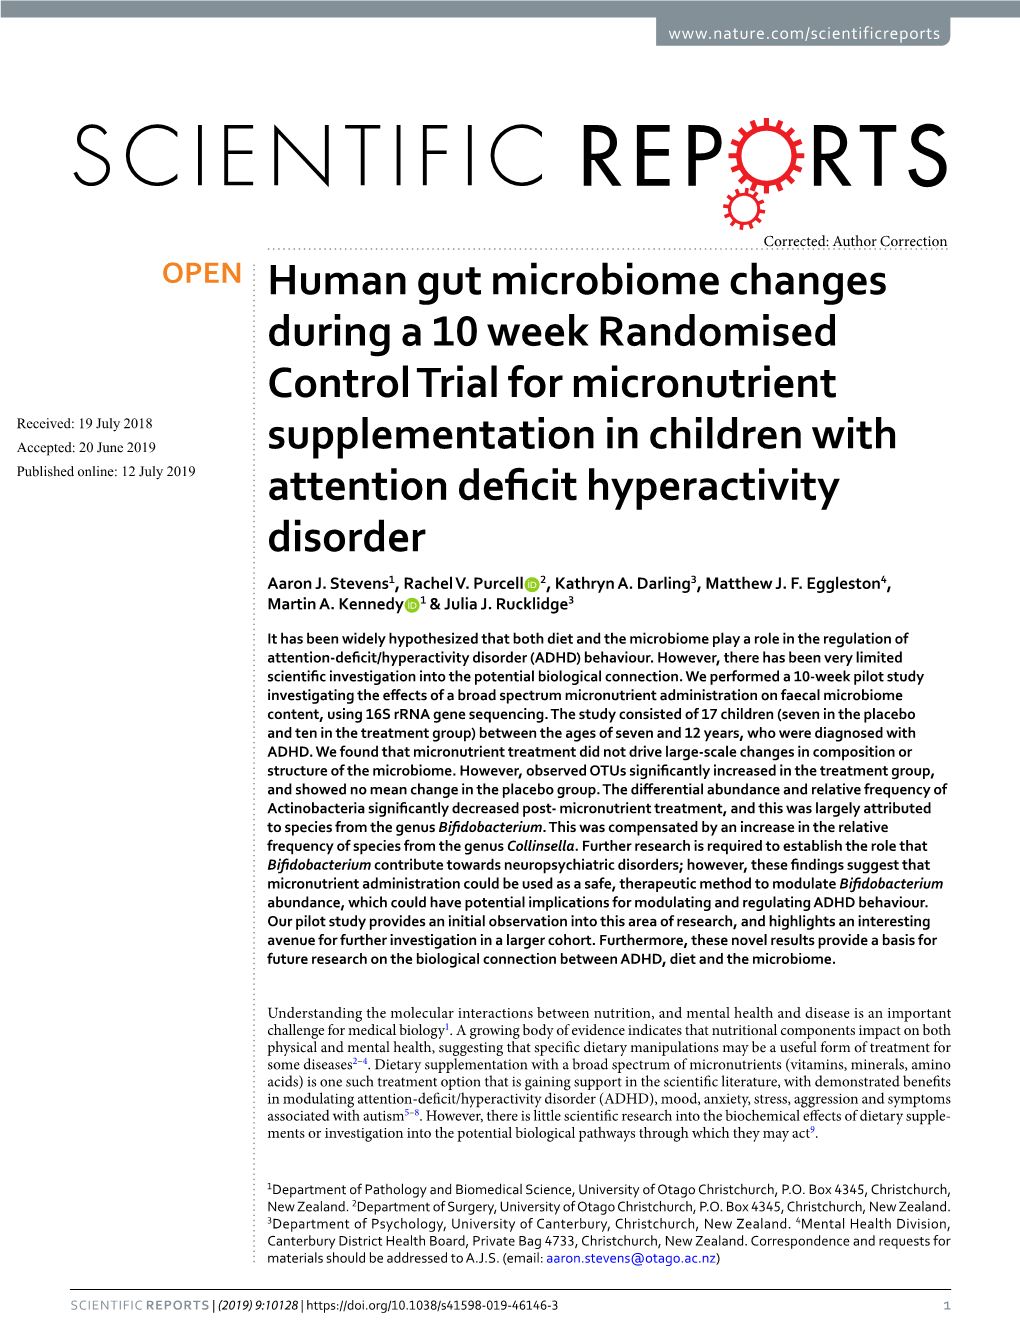 Human Gut Microbiome Changes During a 10 Week Randomised